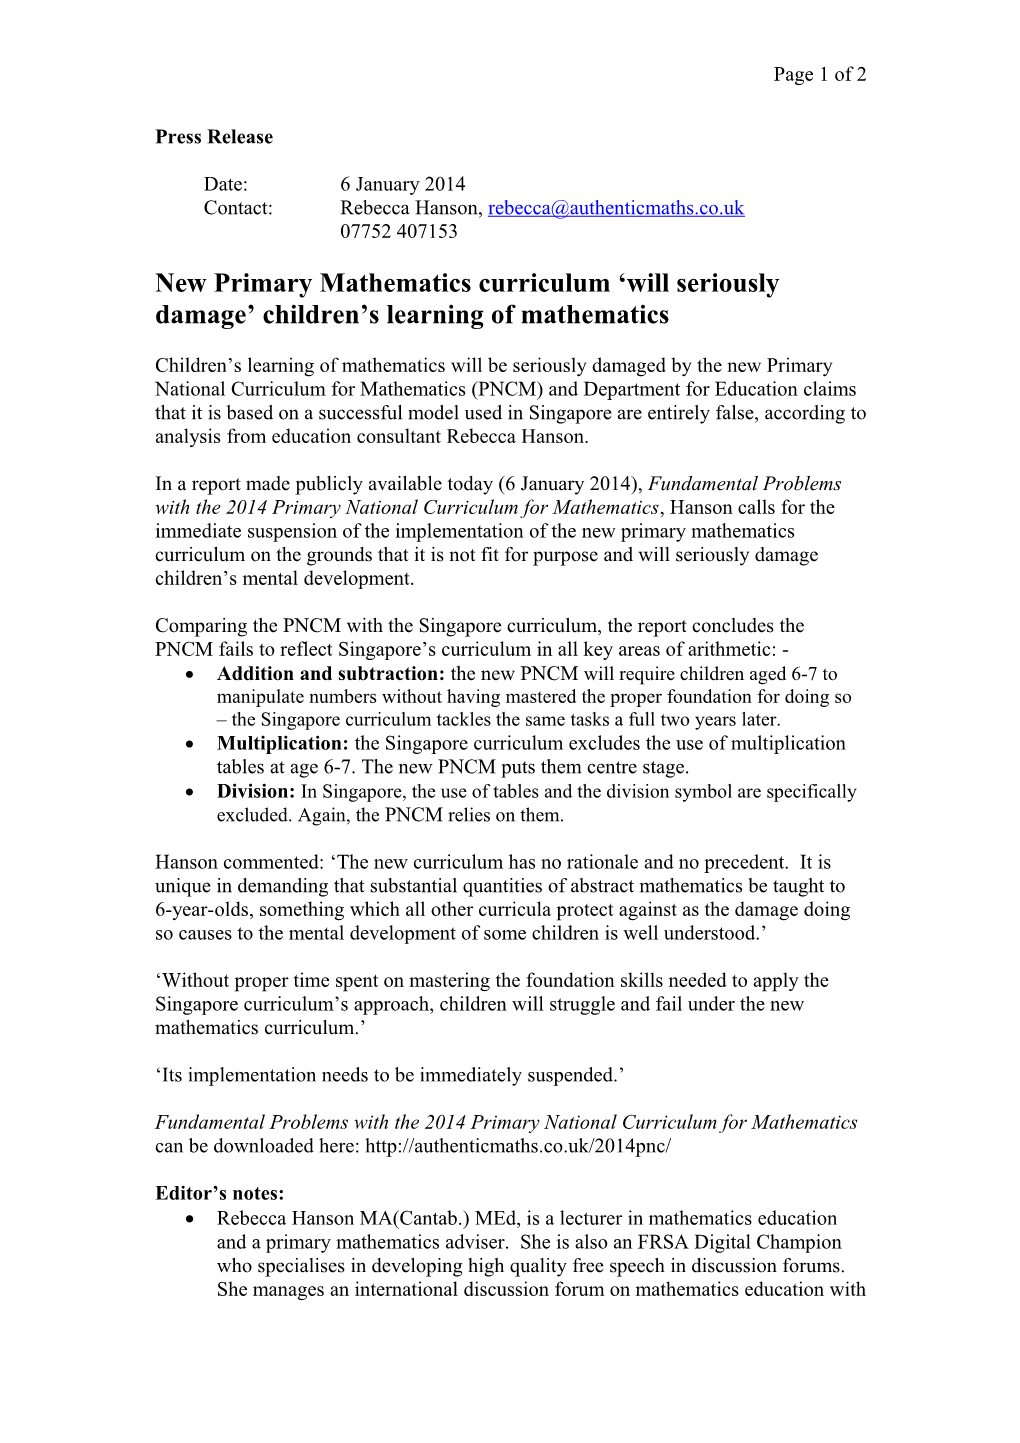 New Primary Mathematics Curriculum Will Seriously Damage Children S Learning of Mathematics